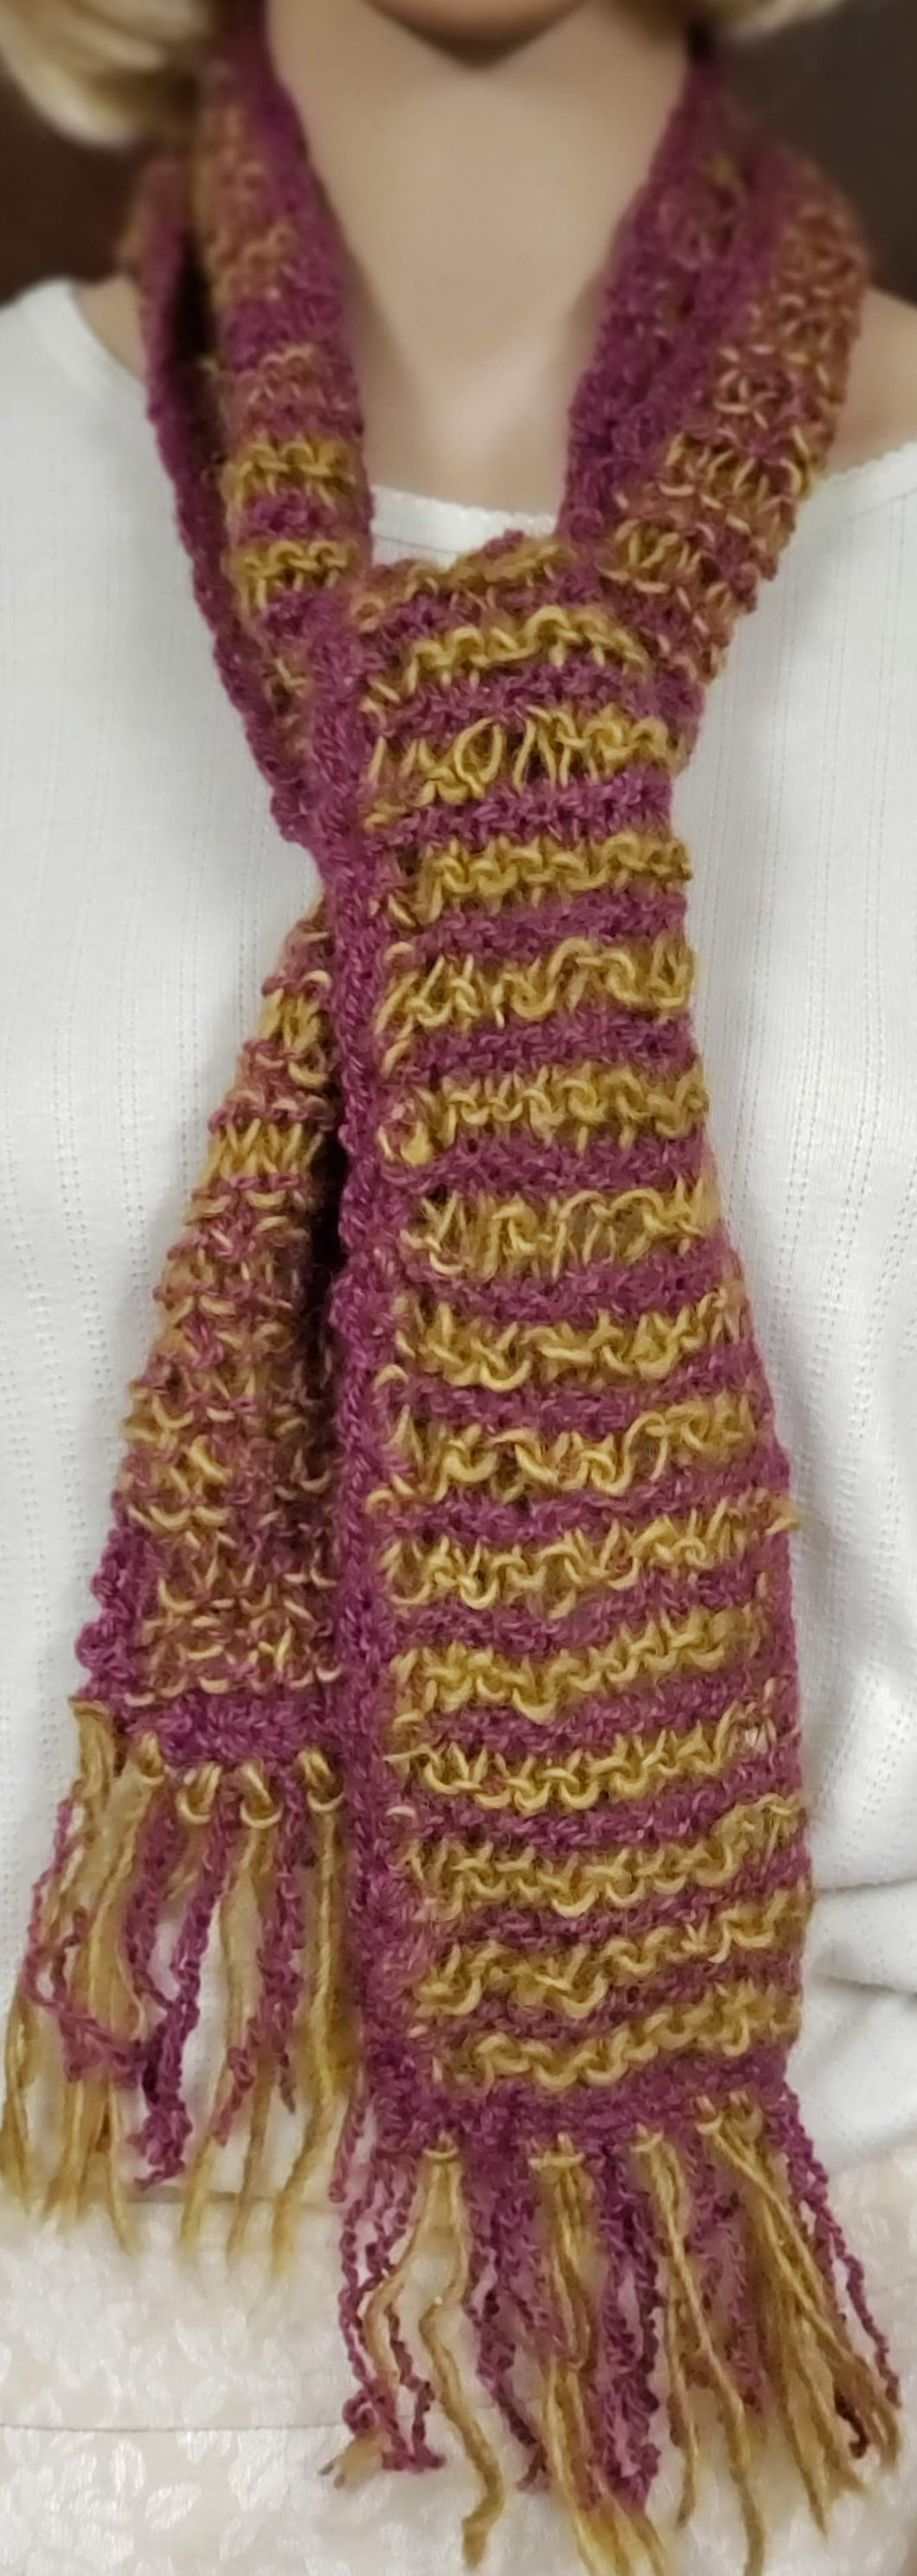 Wool Scarf Hand Knit Gold and Magenta - nw-camo